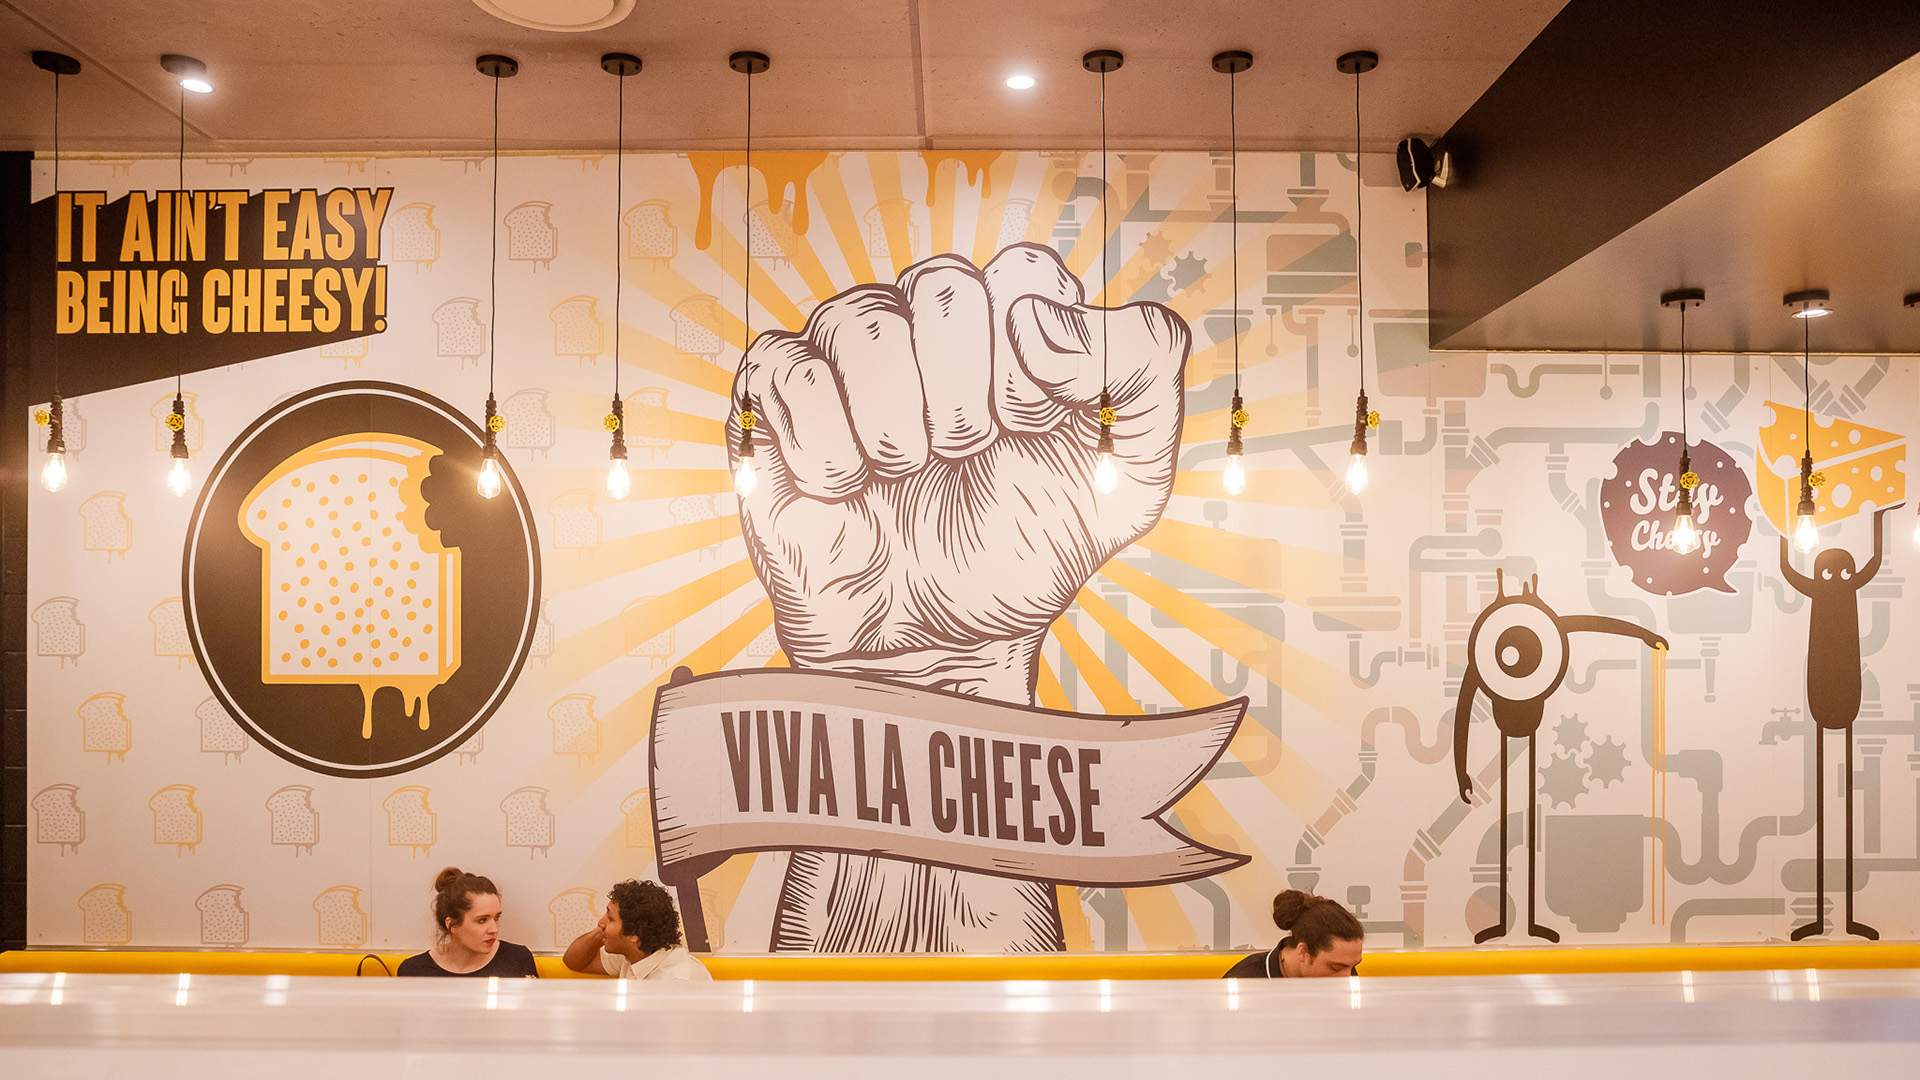 Melt Brothers Expands Its Cheese Toastie Empire to Brisbane's South